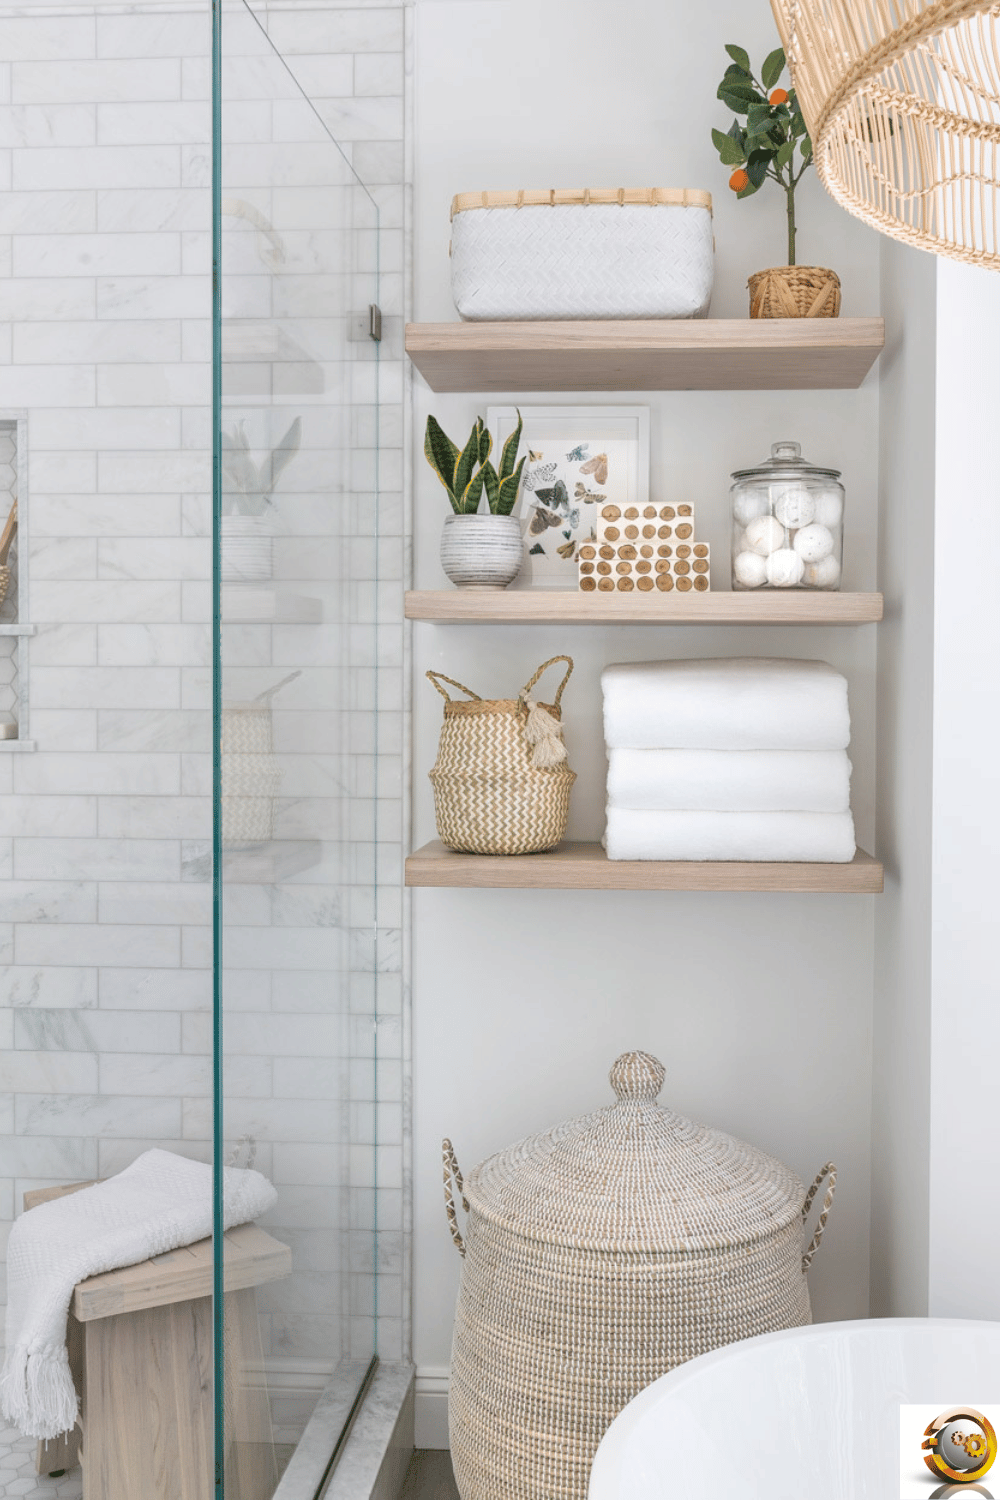 Installing a Floating Shelf In Your Shower Is Easier Than You Think